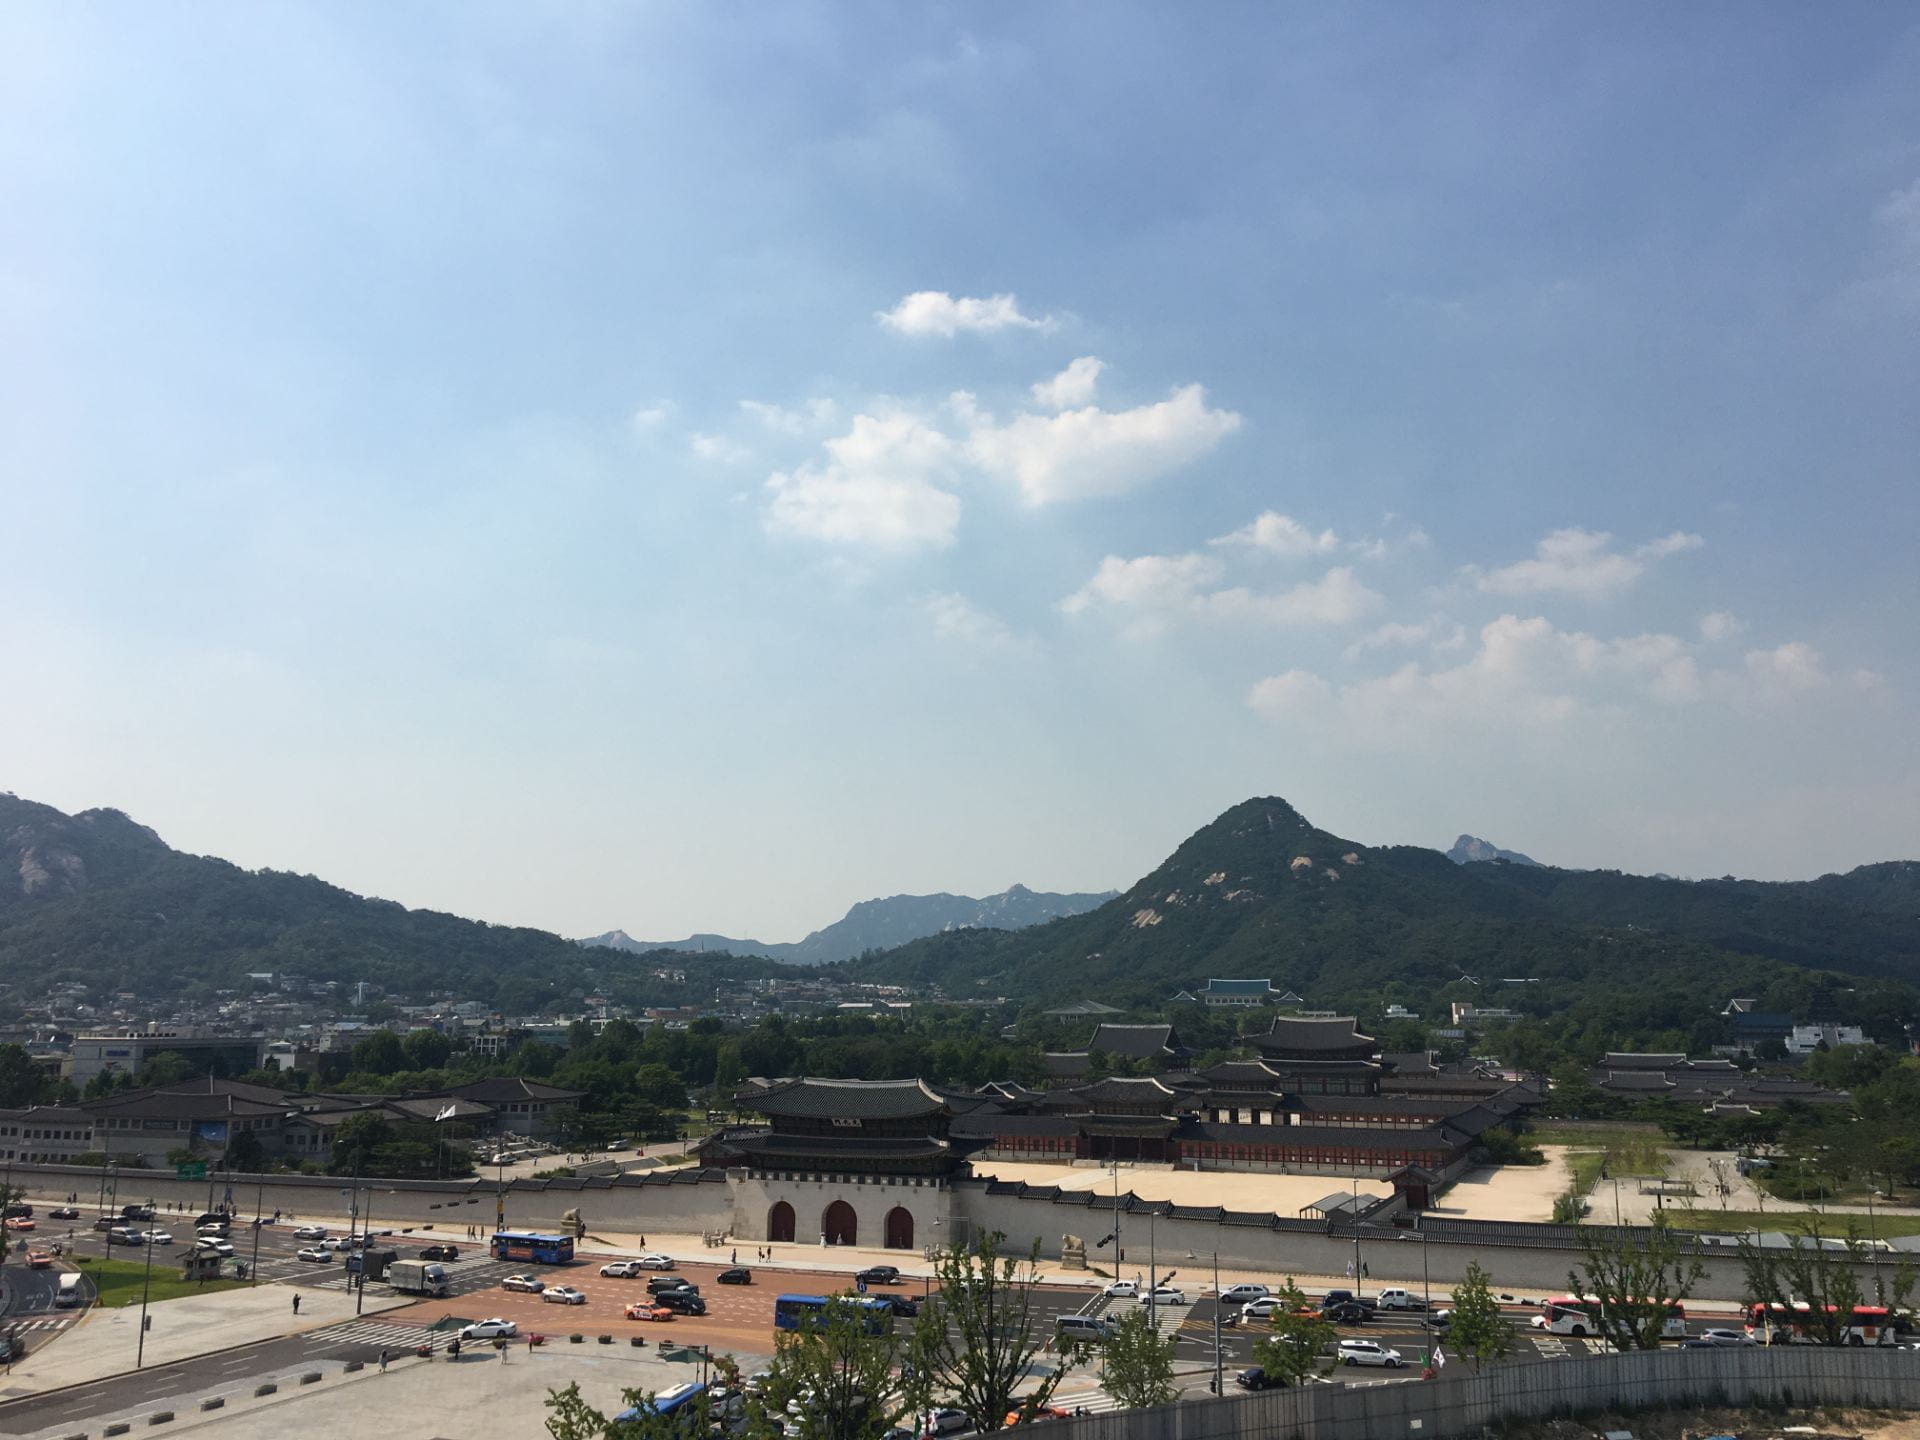 aerial view of a palace in South Korea with mountains in the background